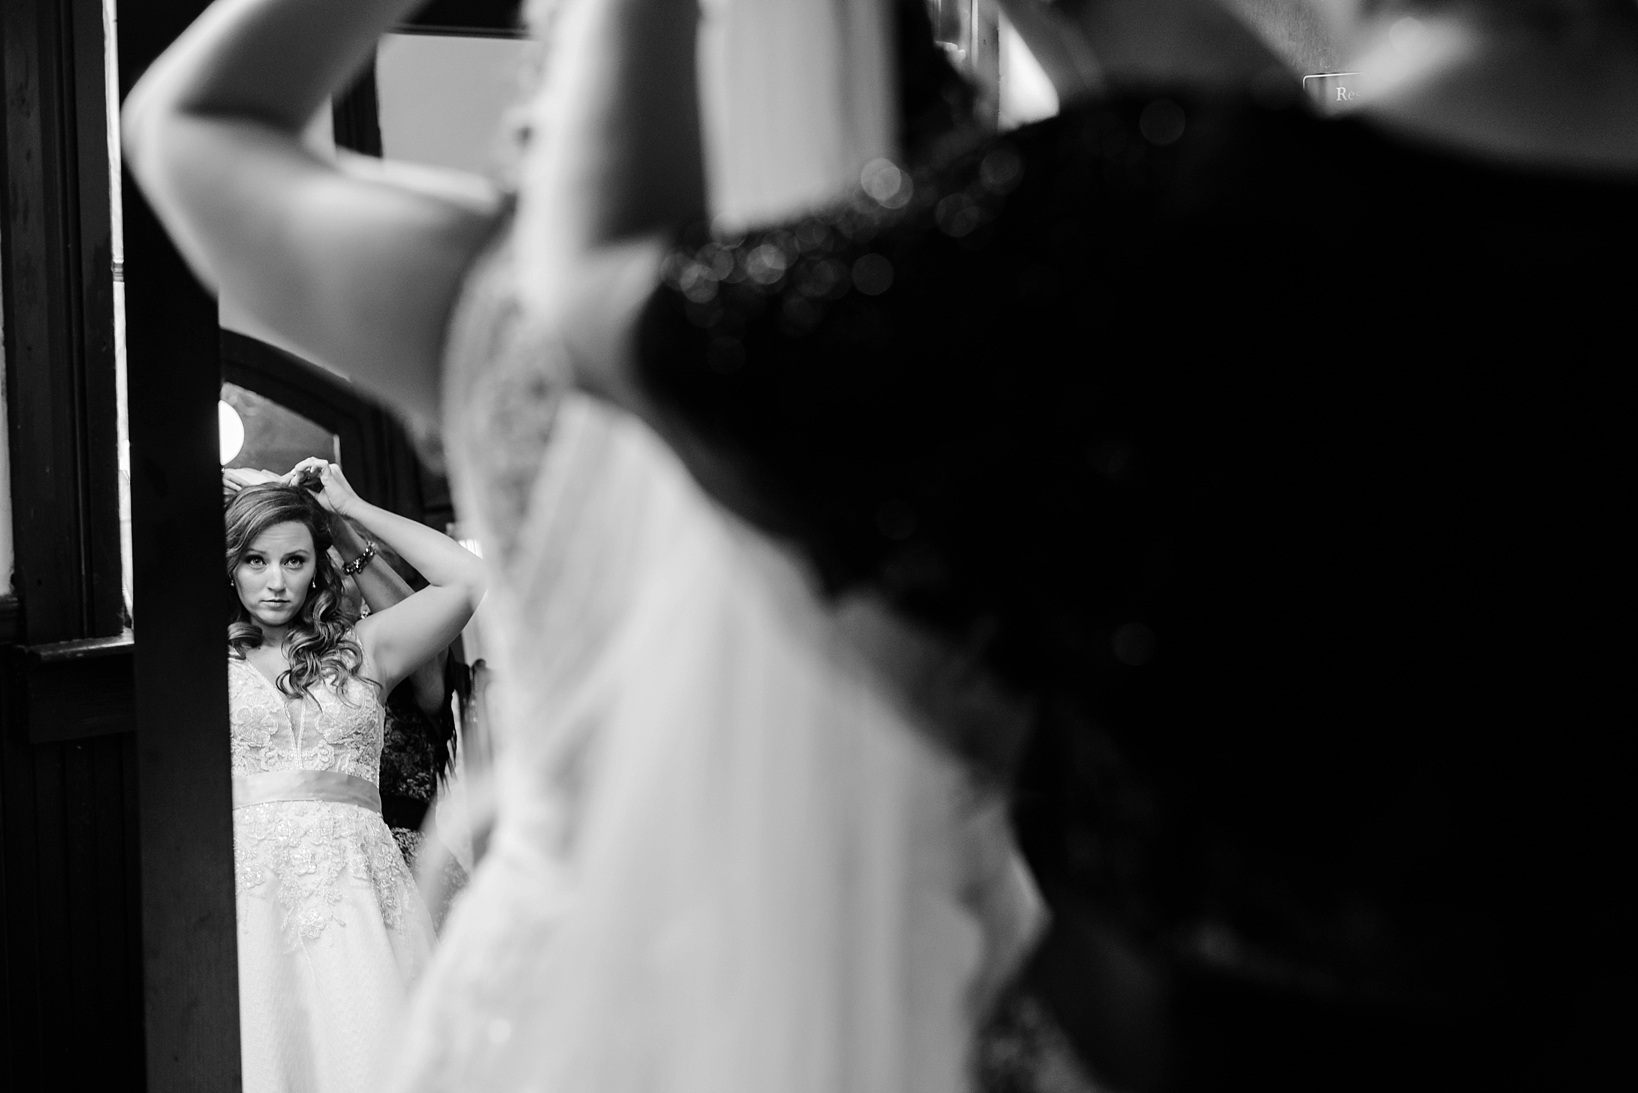 Black and White image of the Bride looking in a mirror for one last check up before walking down the aisle